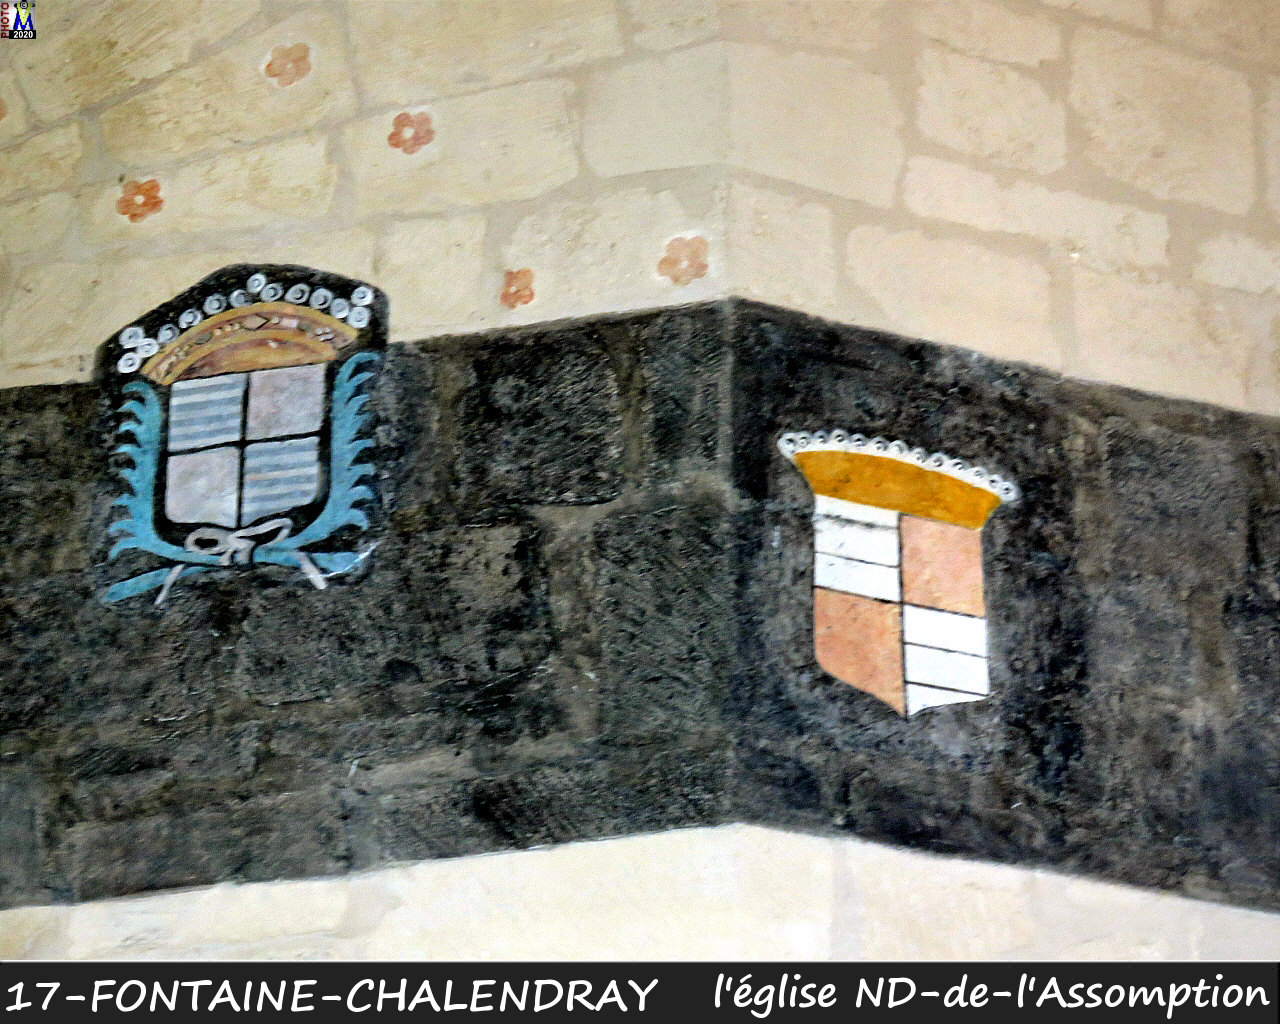 17FONTAINE-CHALENDRAY_eglise_1140.jpg